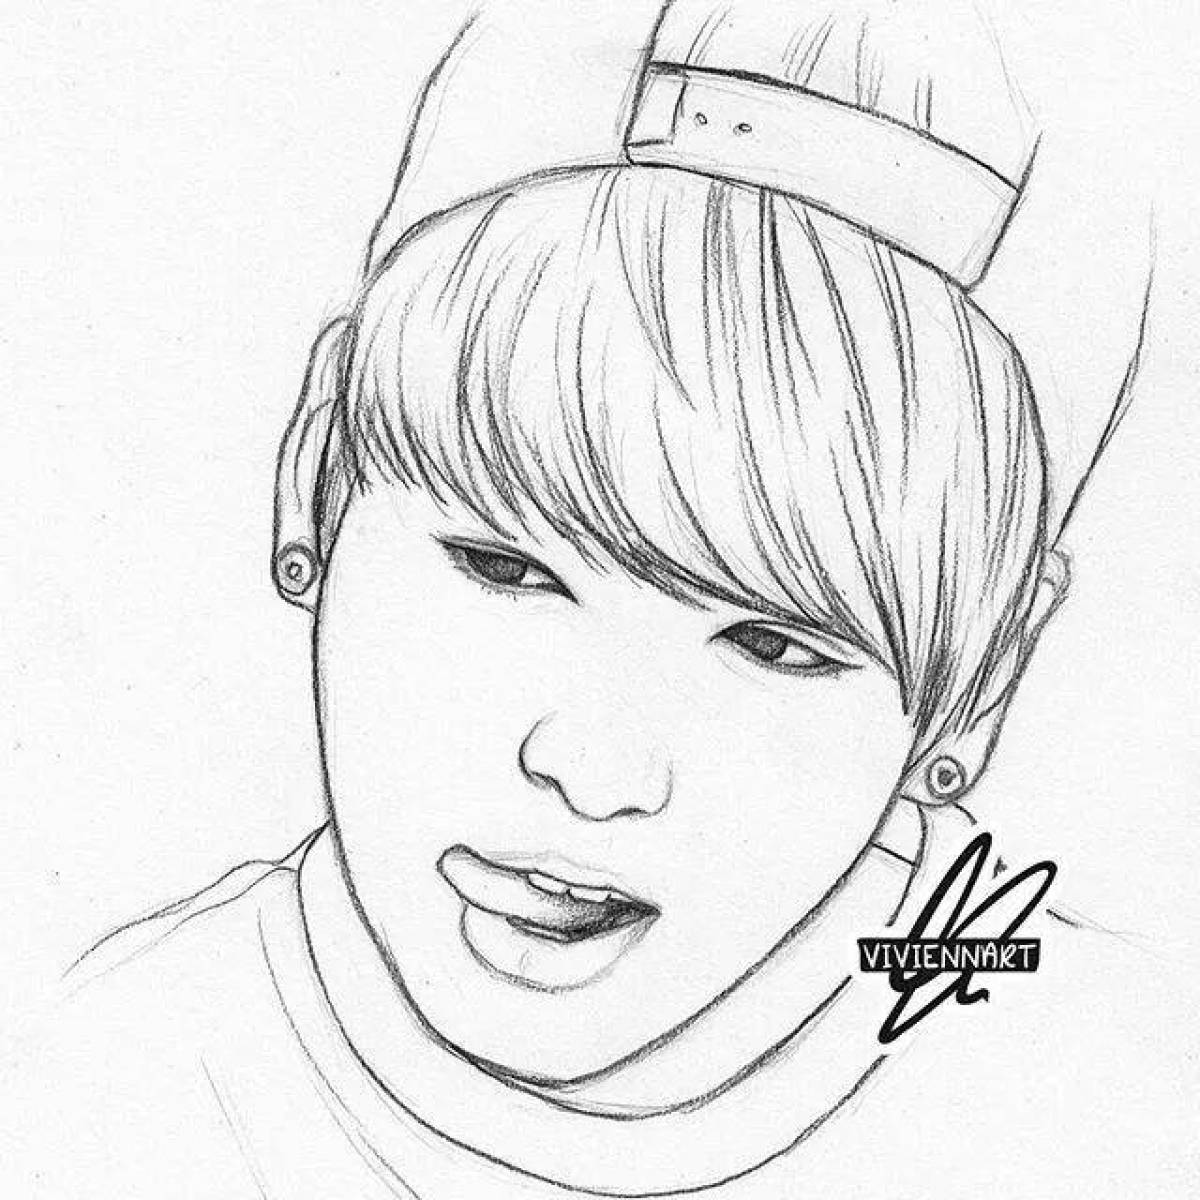 Bts jungkook exciting coloring book